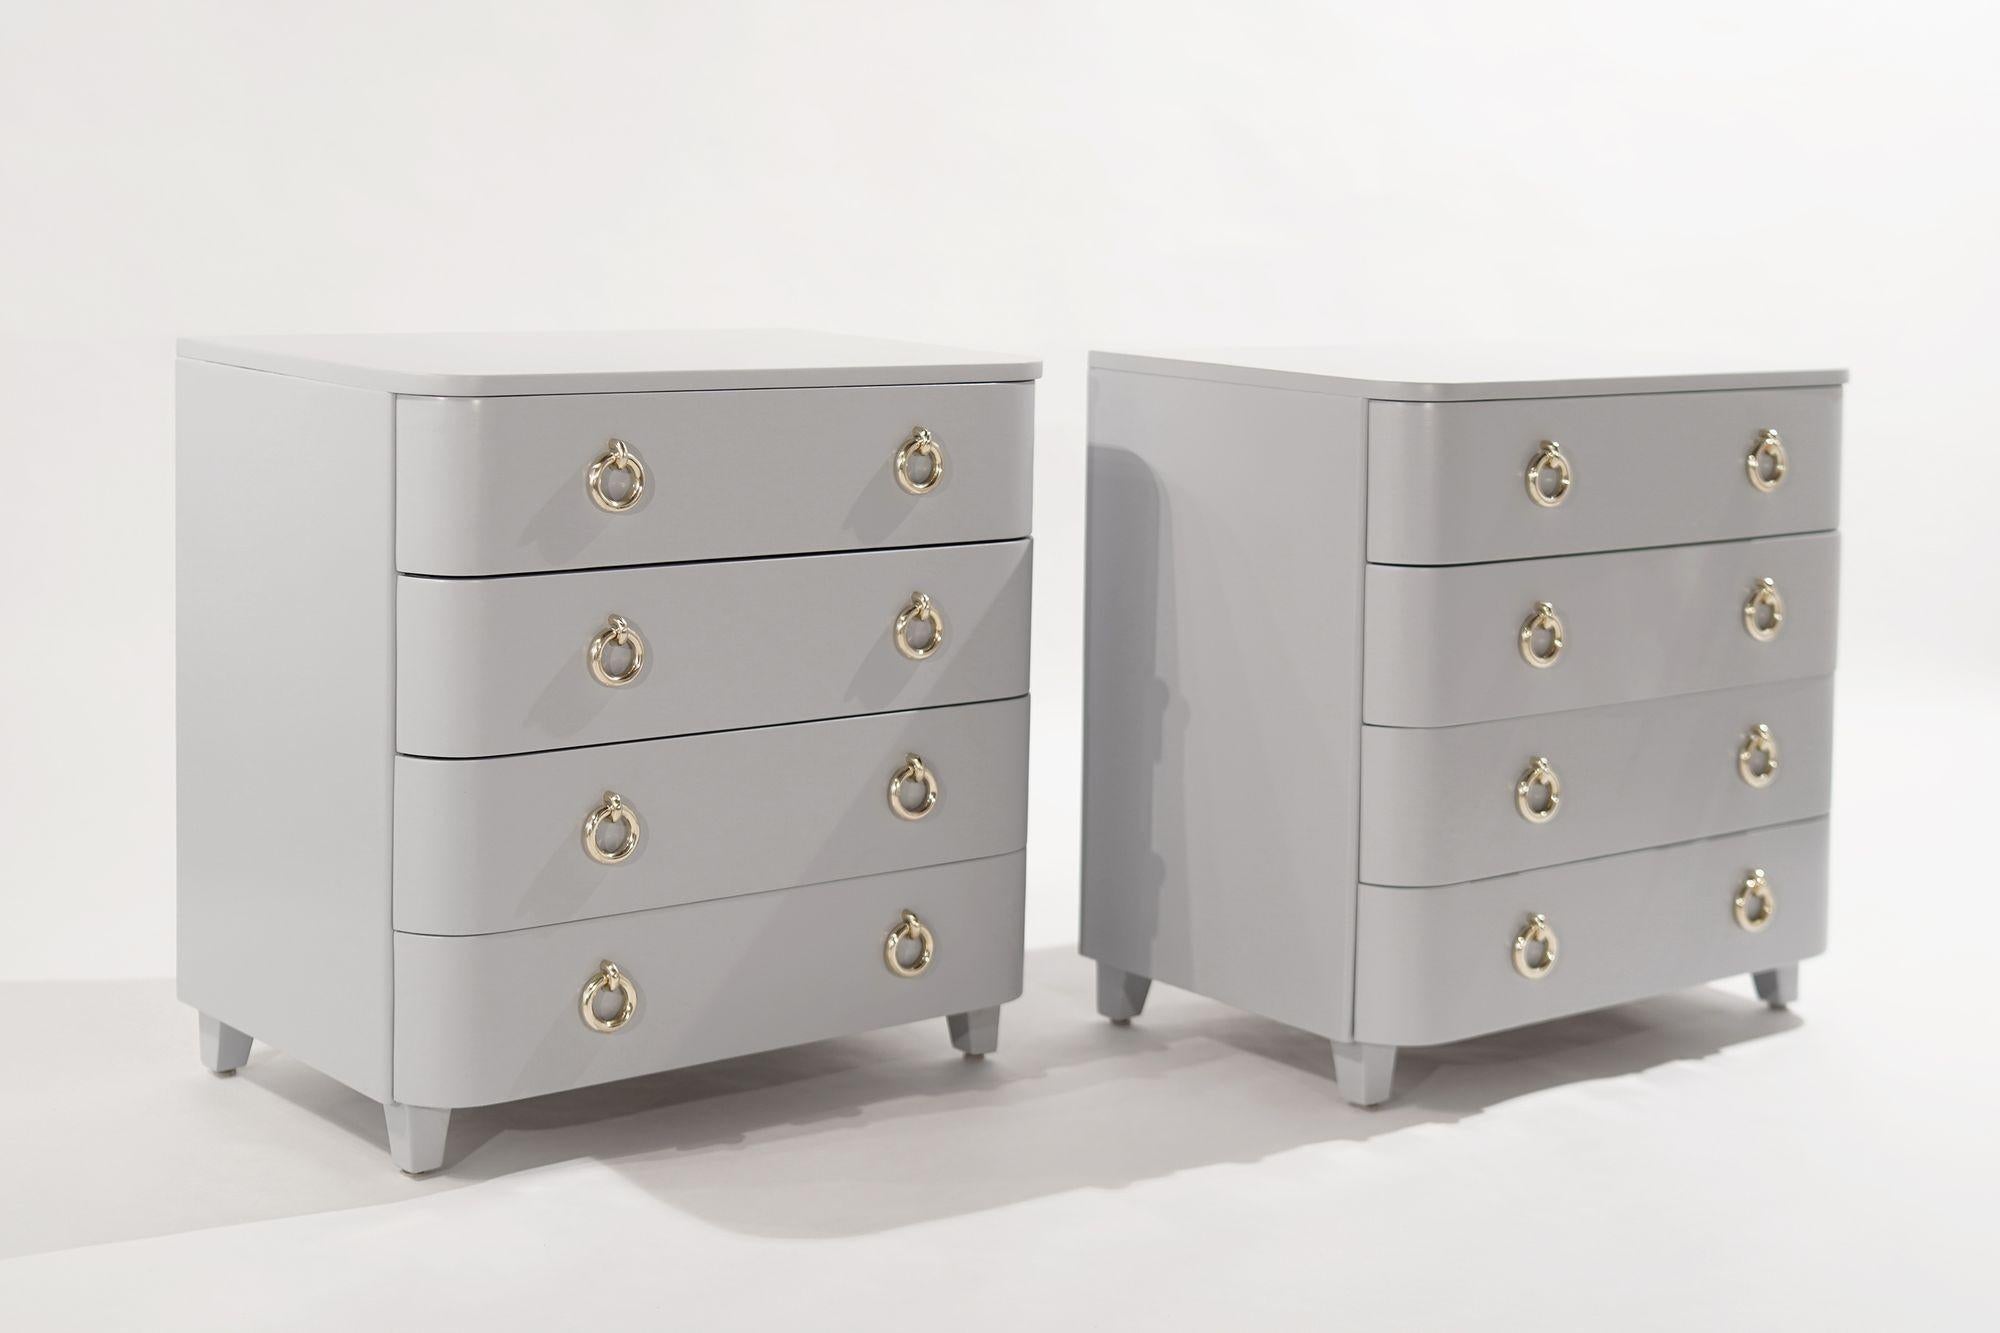 American Set of Modernist Lacquered Bedside Tables, C. 1950s For Sale